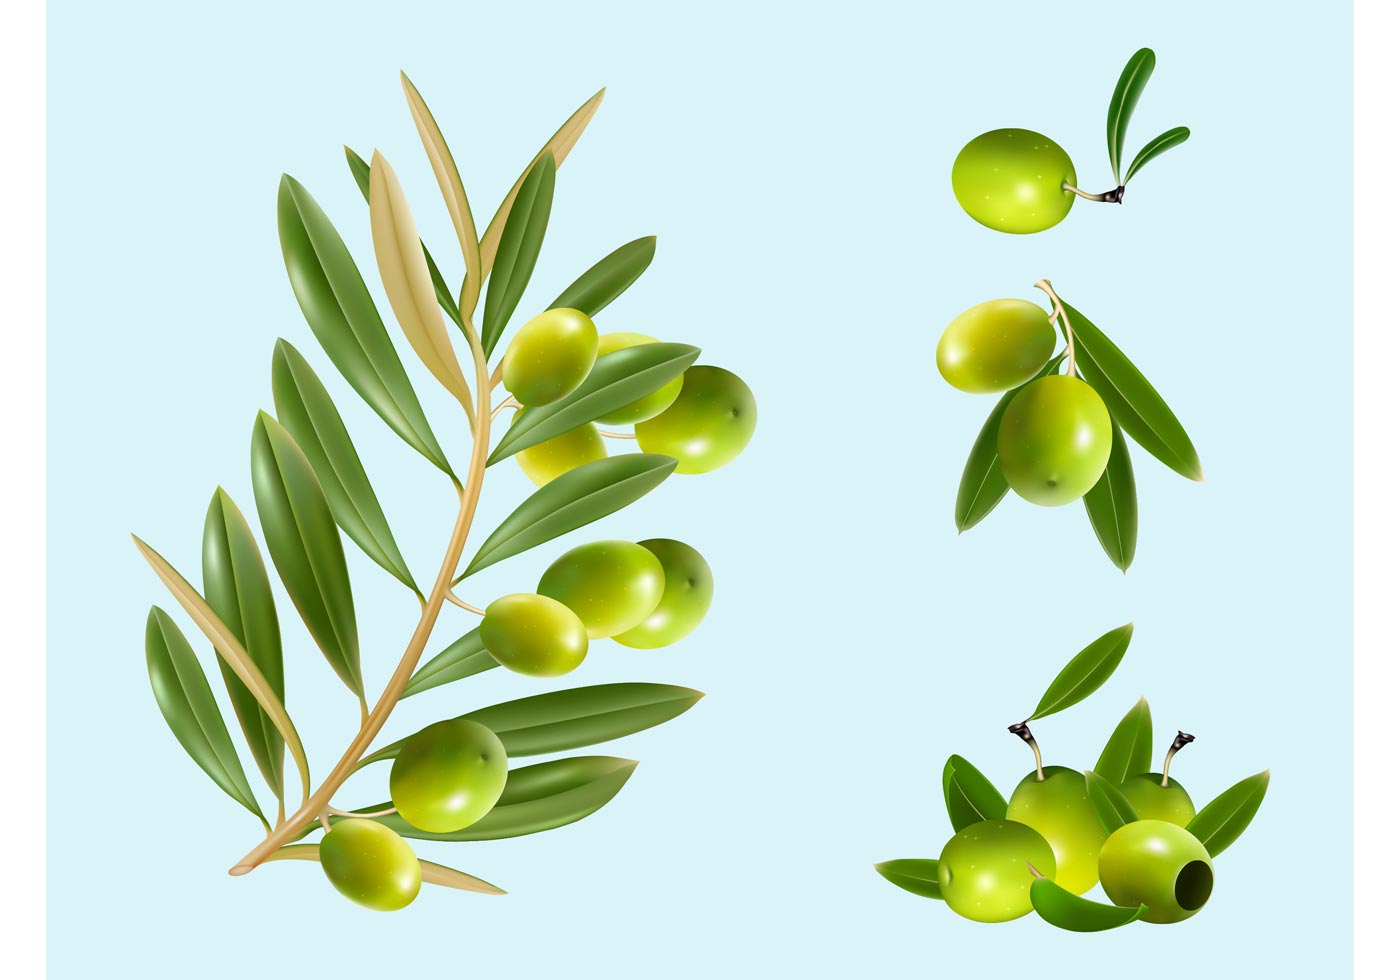 Olive Branch Free Vector Art - (2314 Free Downloads)